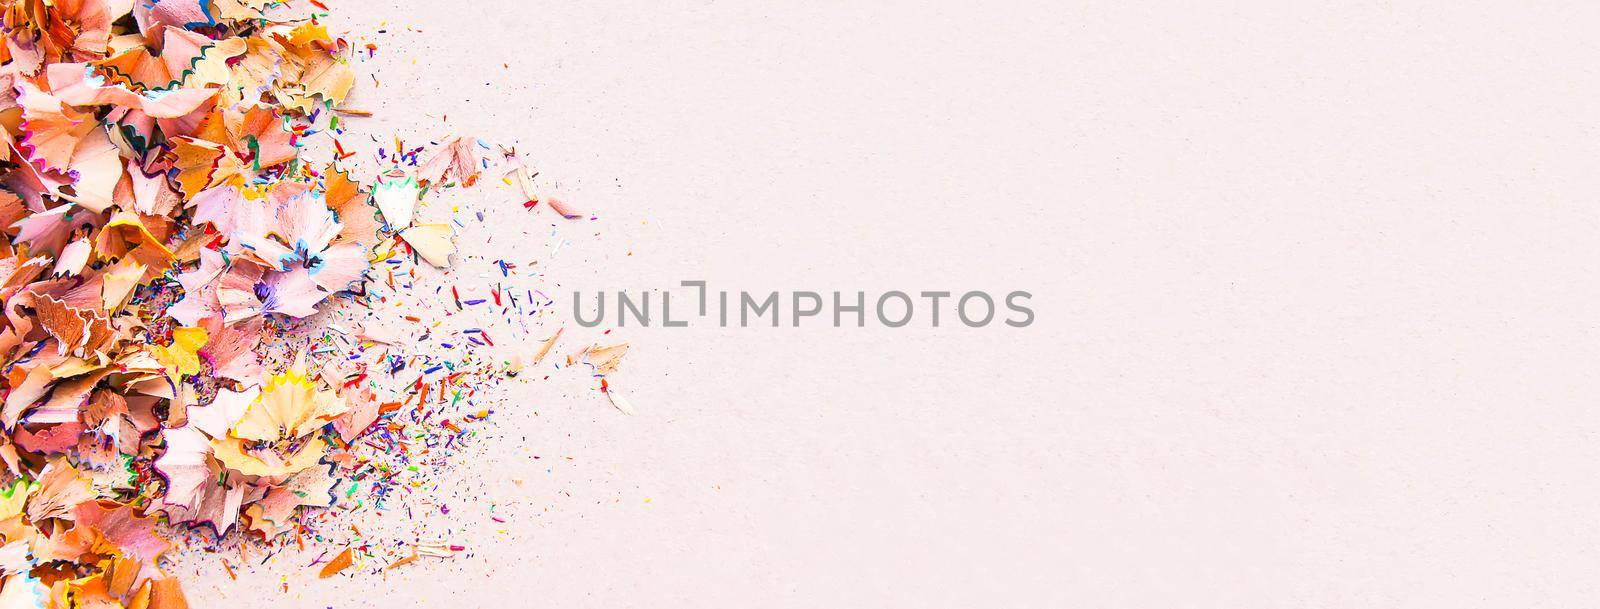 Wooden pencil shavings and colorful crumbs of graphite from sharpener on soft pink paper background. Top view. Design elements for poster, banner, cards.